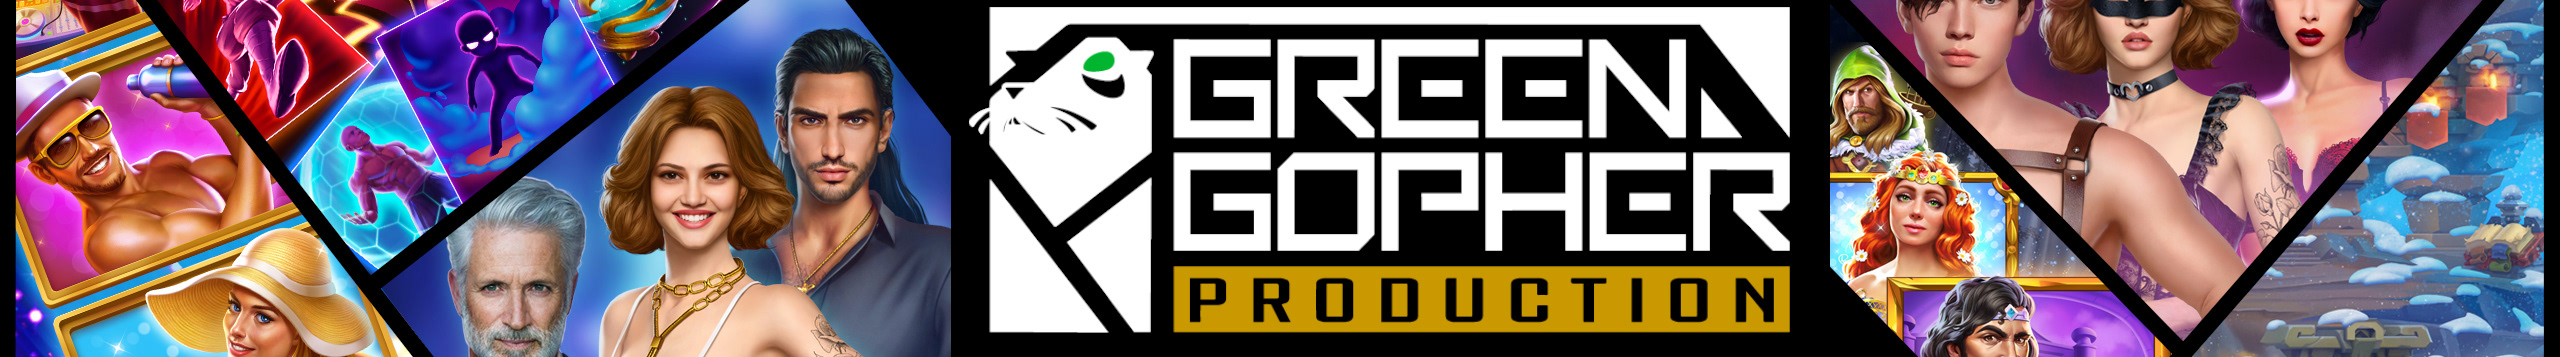 Green Gopher Production's profile banner